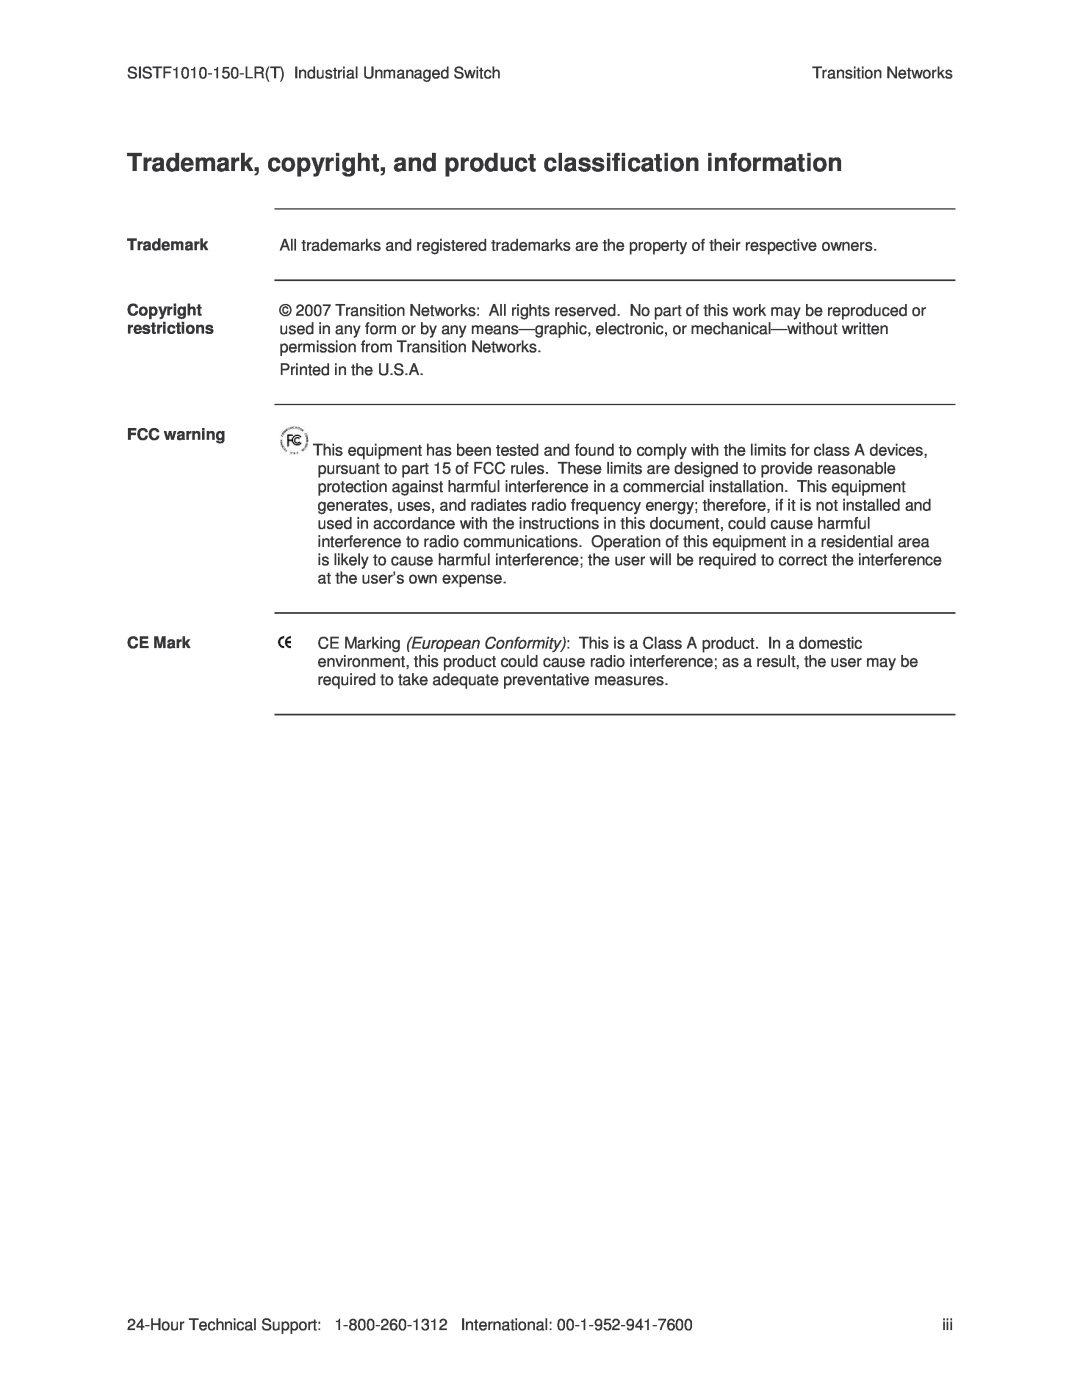 Transition Networks SISTF1010-150-LR(T) installation manual Trademark, copyright, and product classification information 